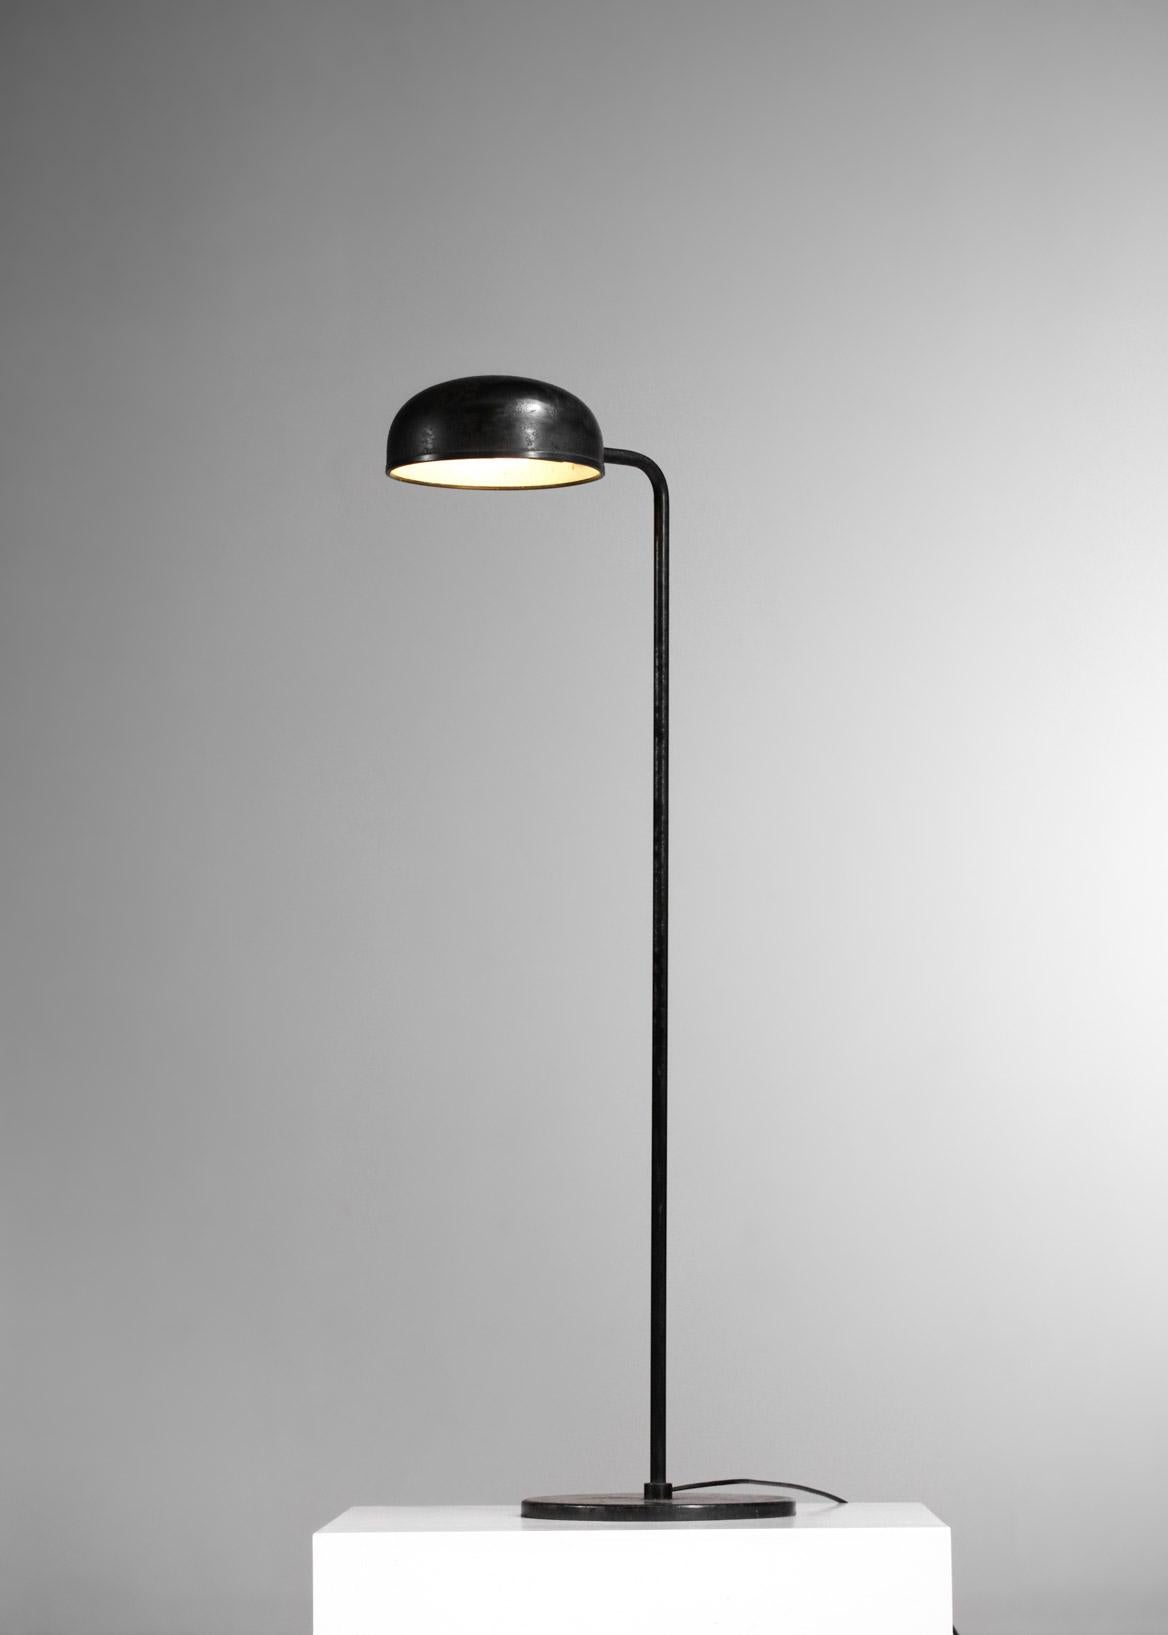 Scandinavian floor lamp from the 70's, model P98 by Danish designer Abo Randers.  Entirely in black lacquered metal, inside the lampshade lacquered in white (original paint). Clean and timeless lines typical of Scandinavian design. The lamp has been